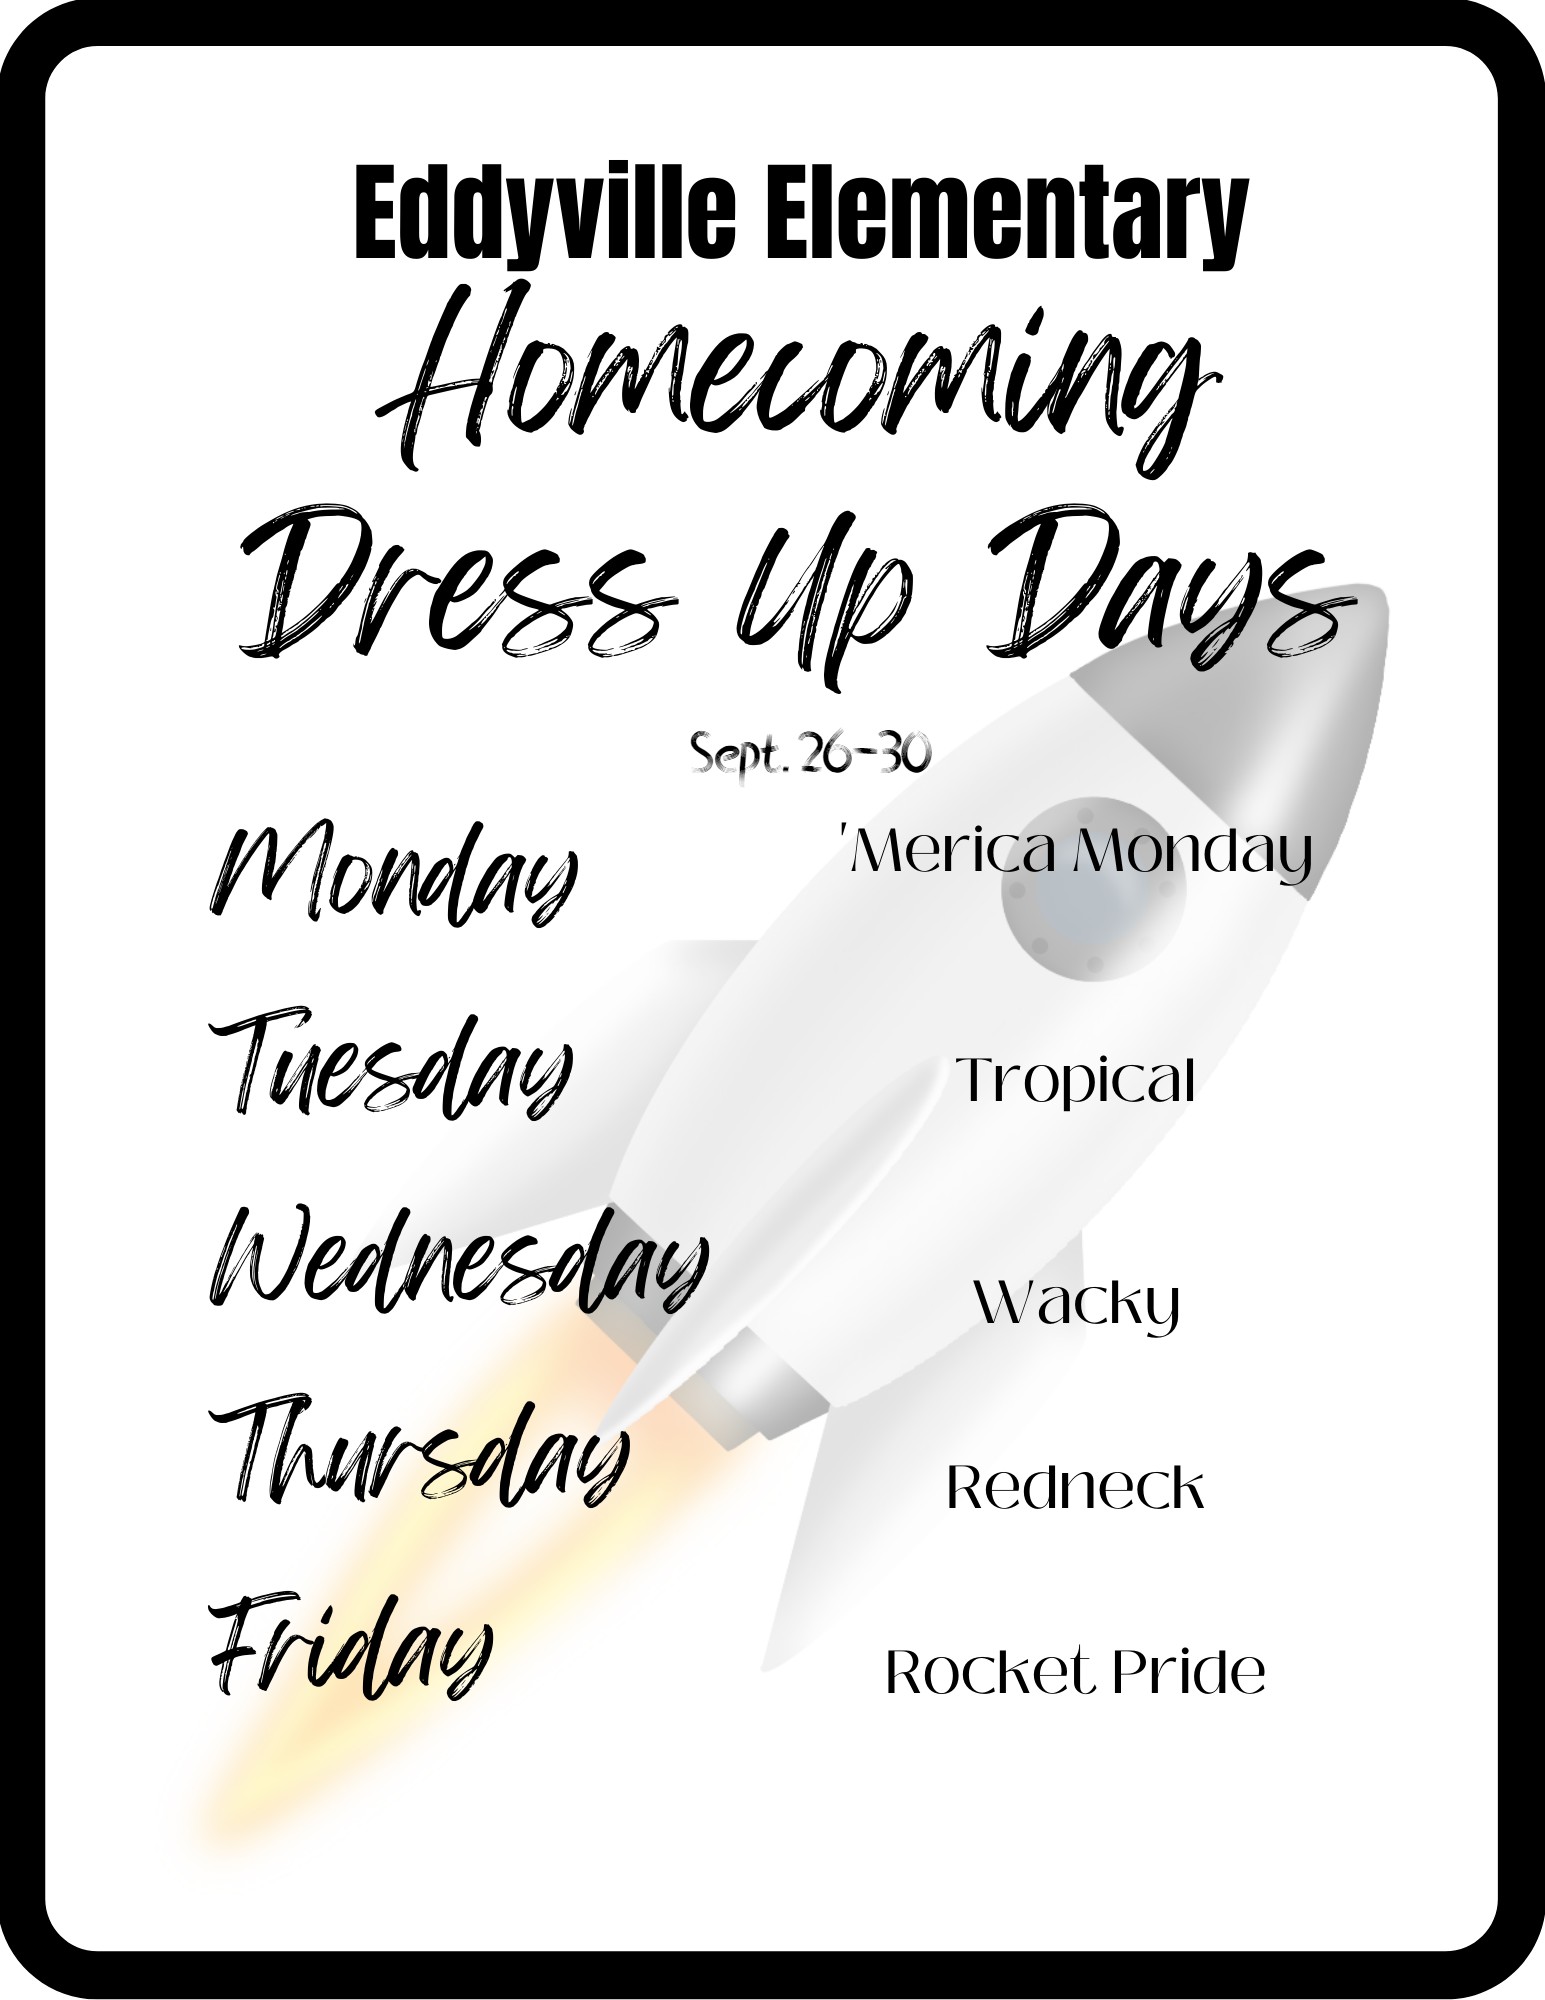 EE Homecoming Dress Up Days